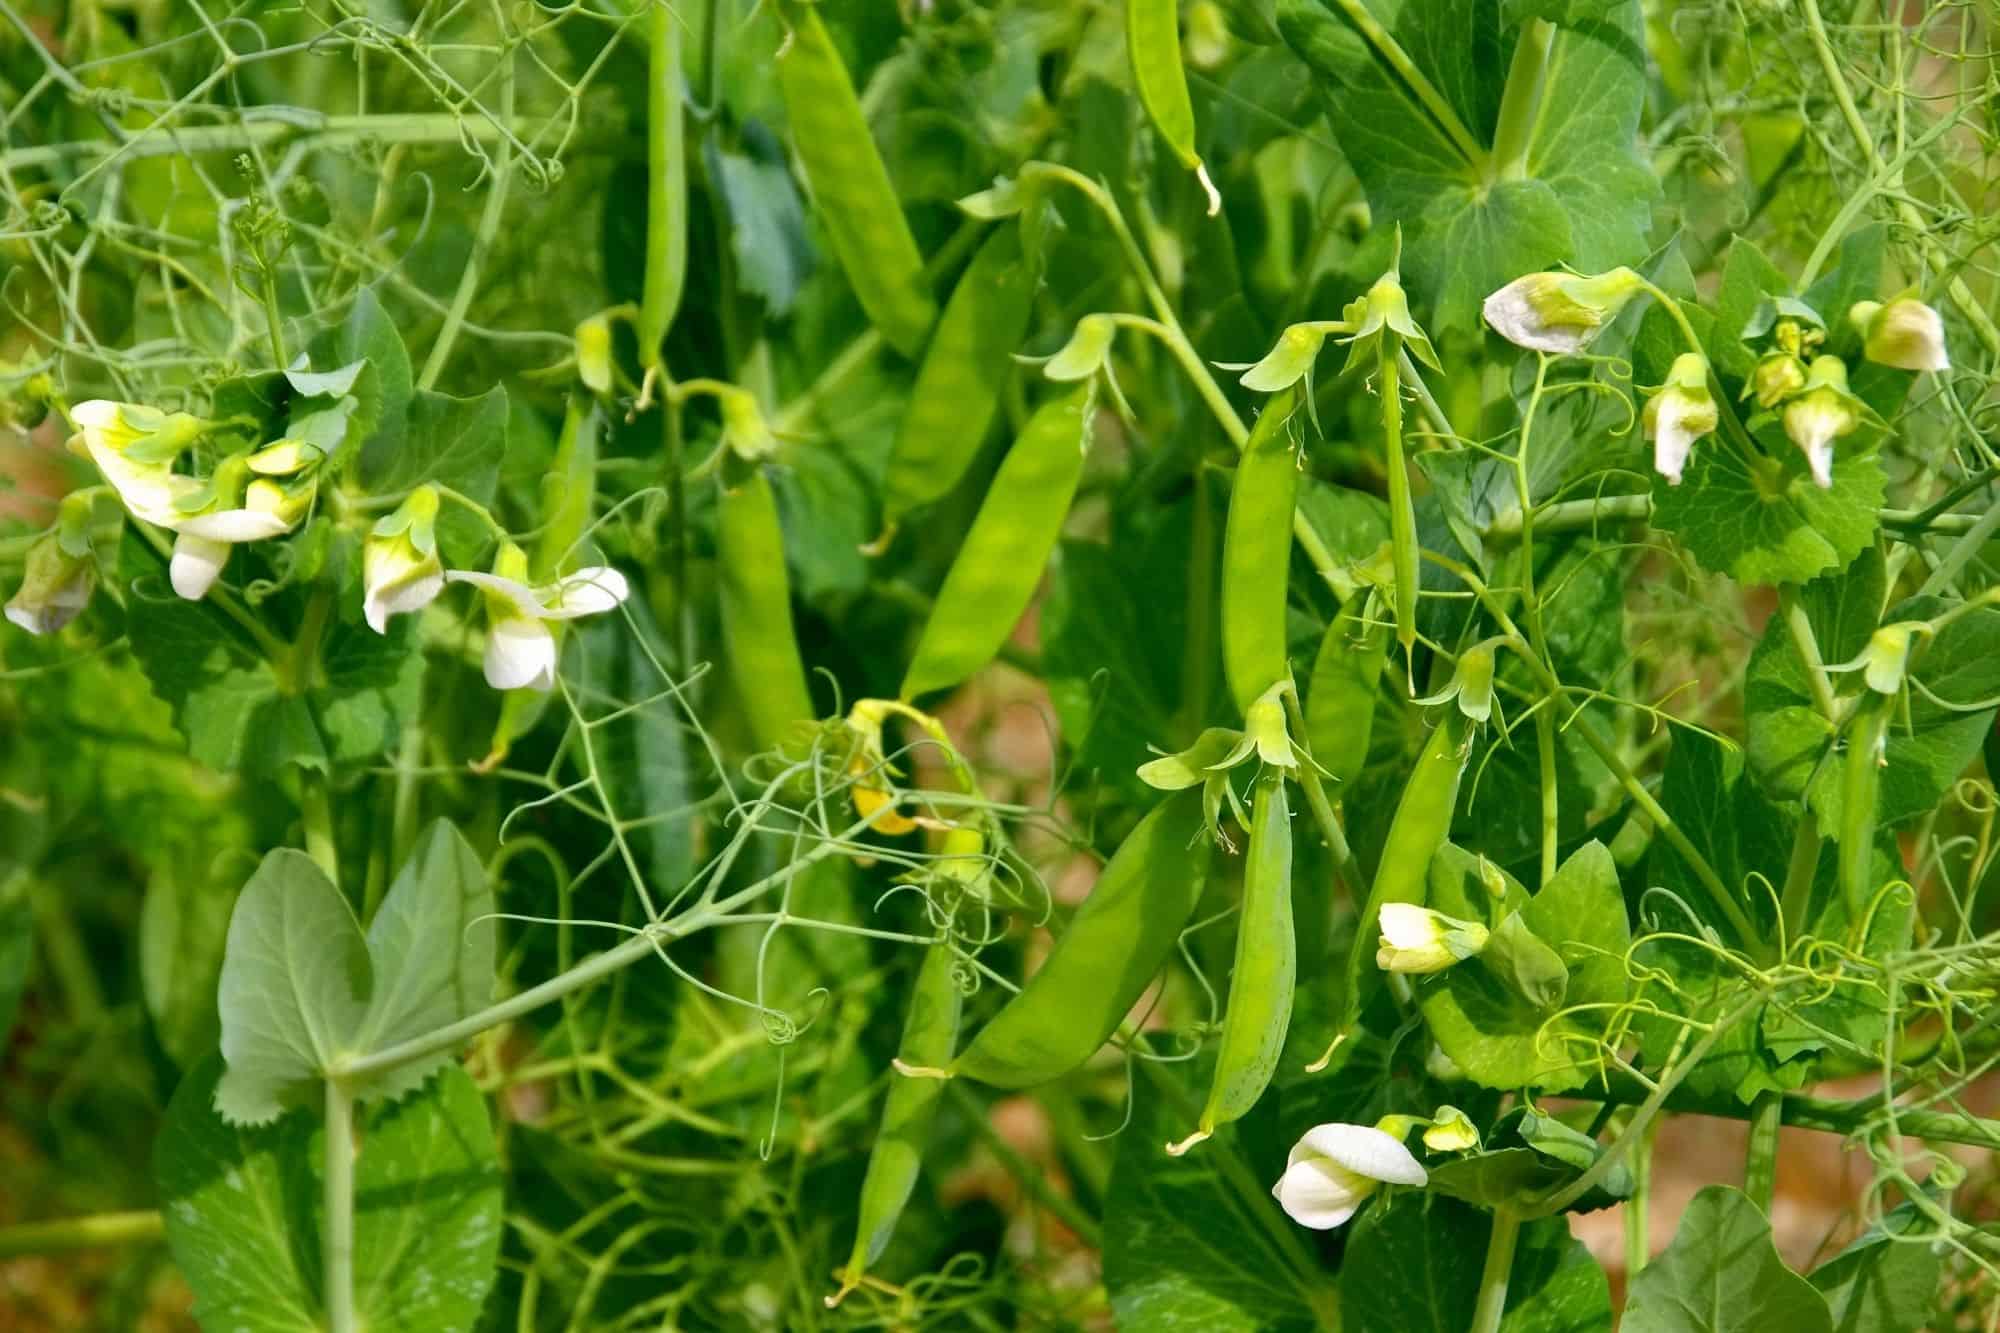 Green peas growing in the garden with foliage and white flowers.